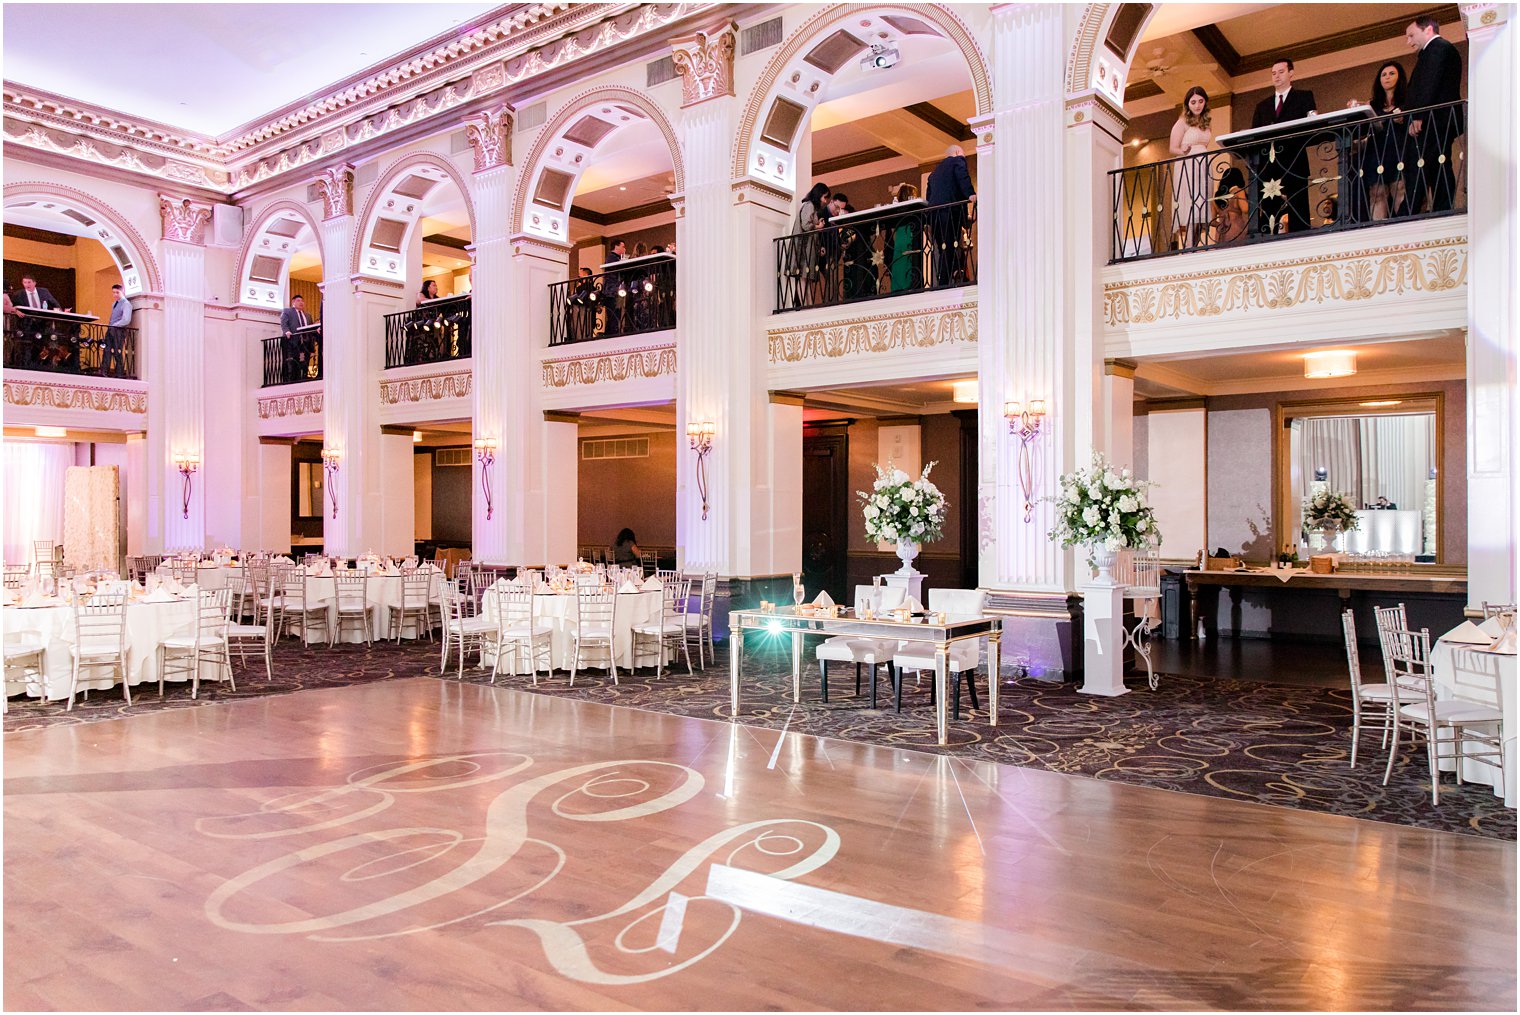 classic Ballroom at the Ben wedding reception with white and gold details 